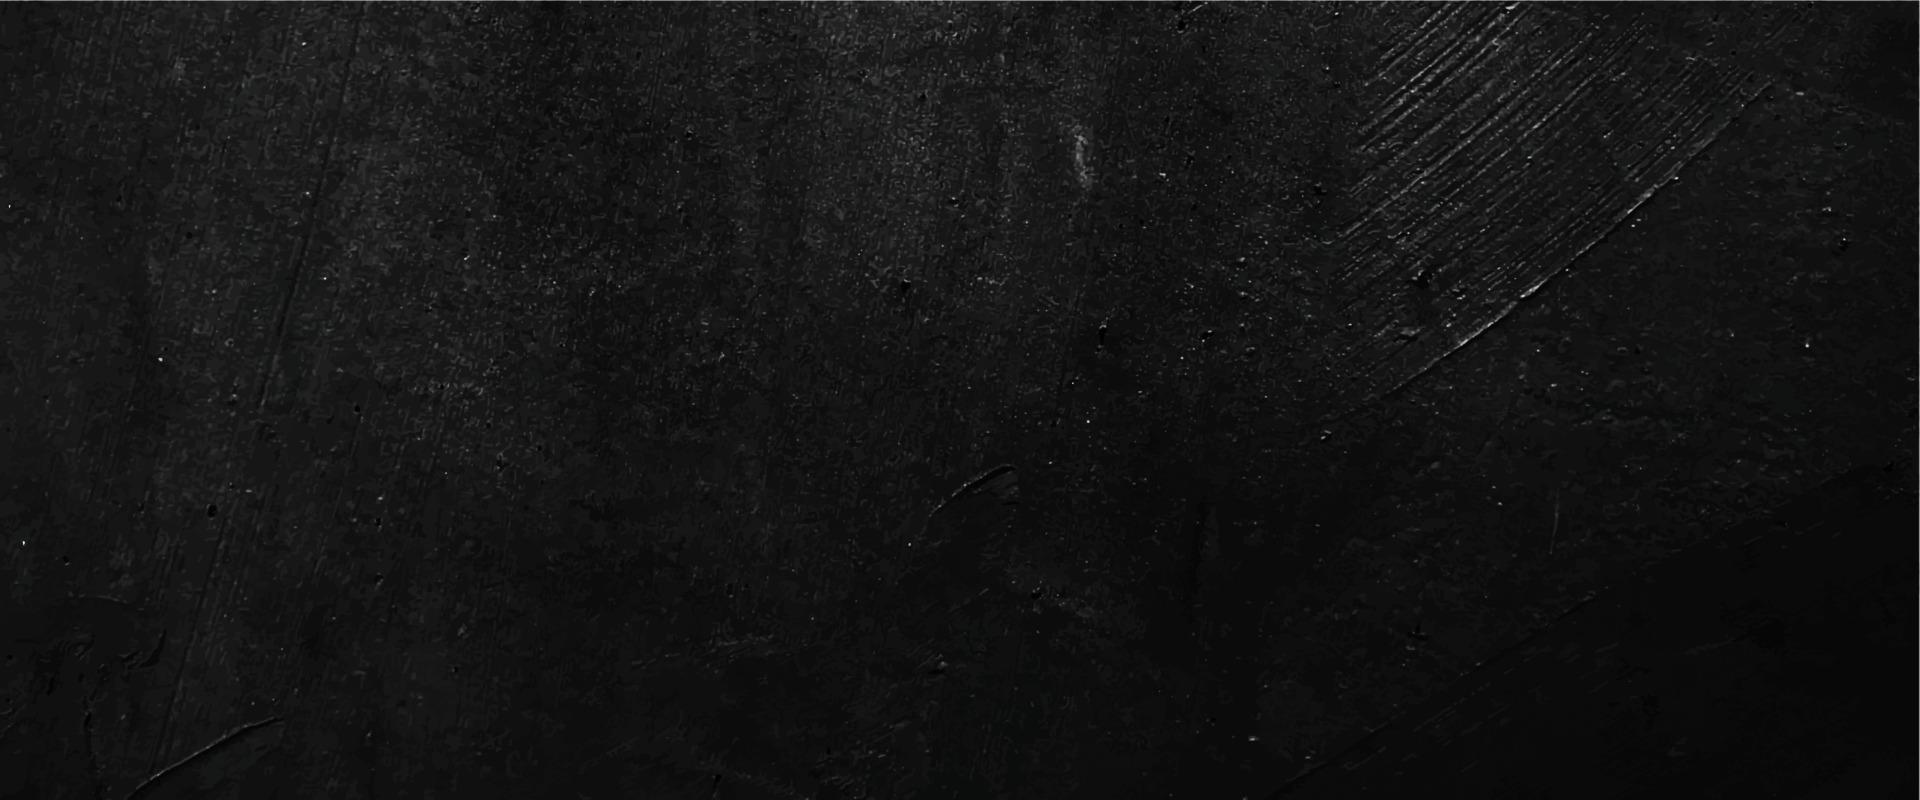 Abstract Black Grunge Texture Background vector